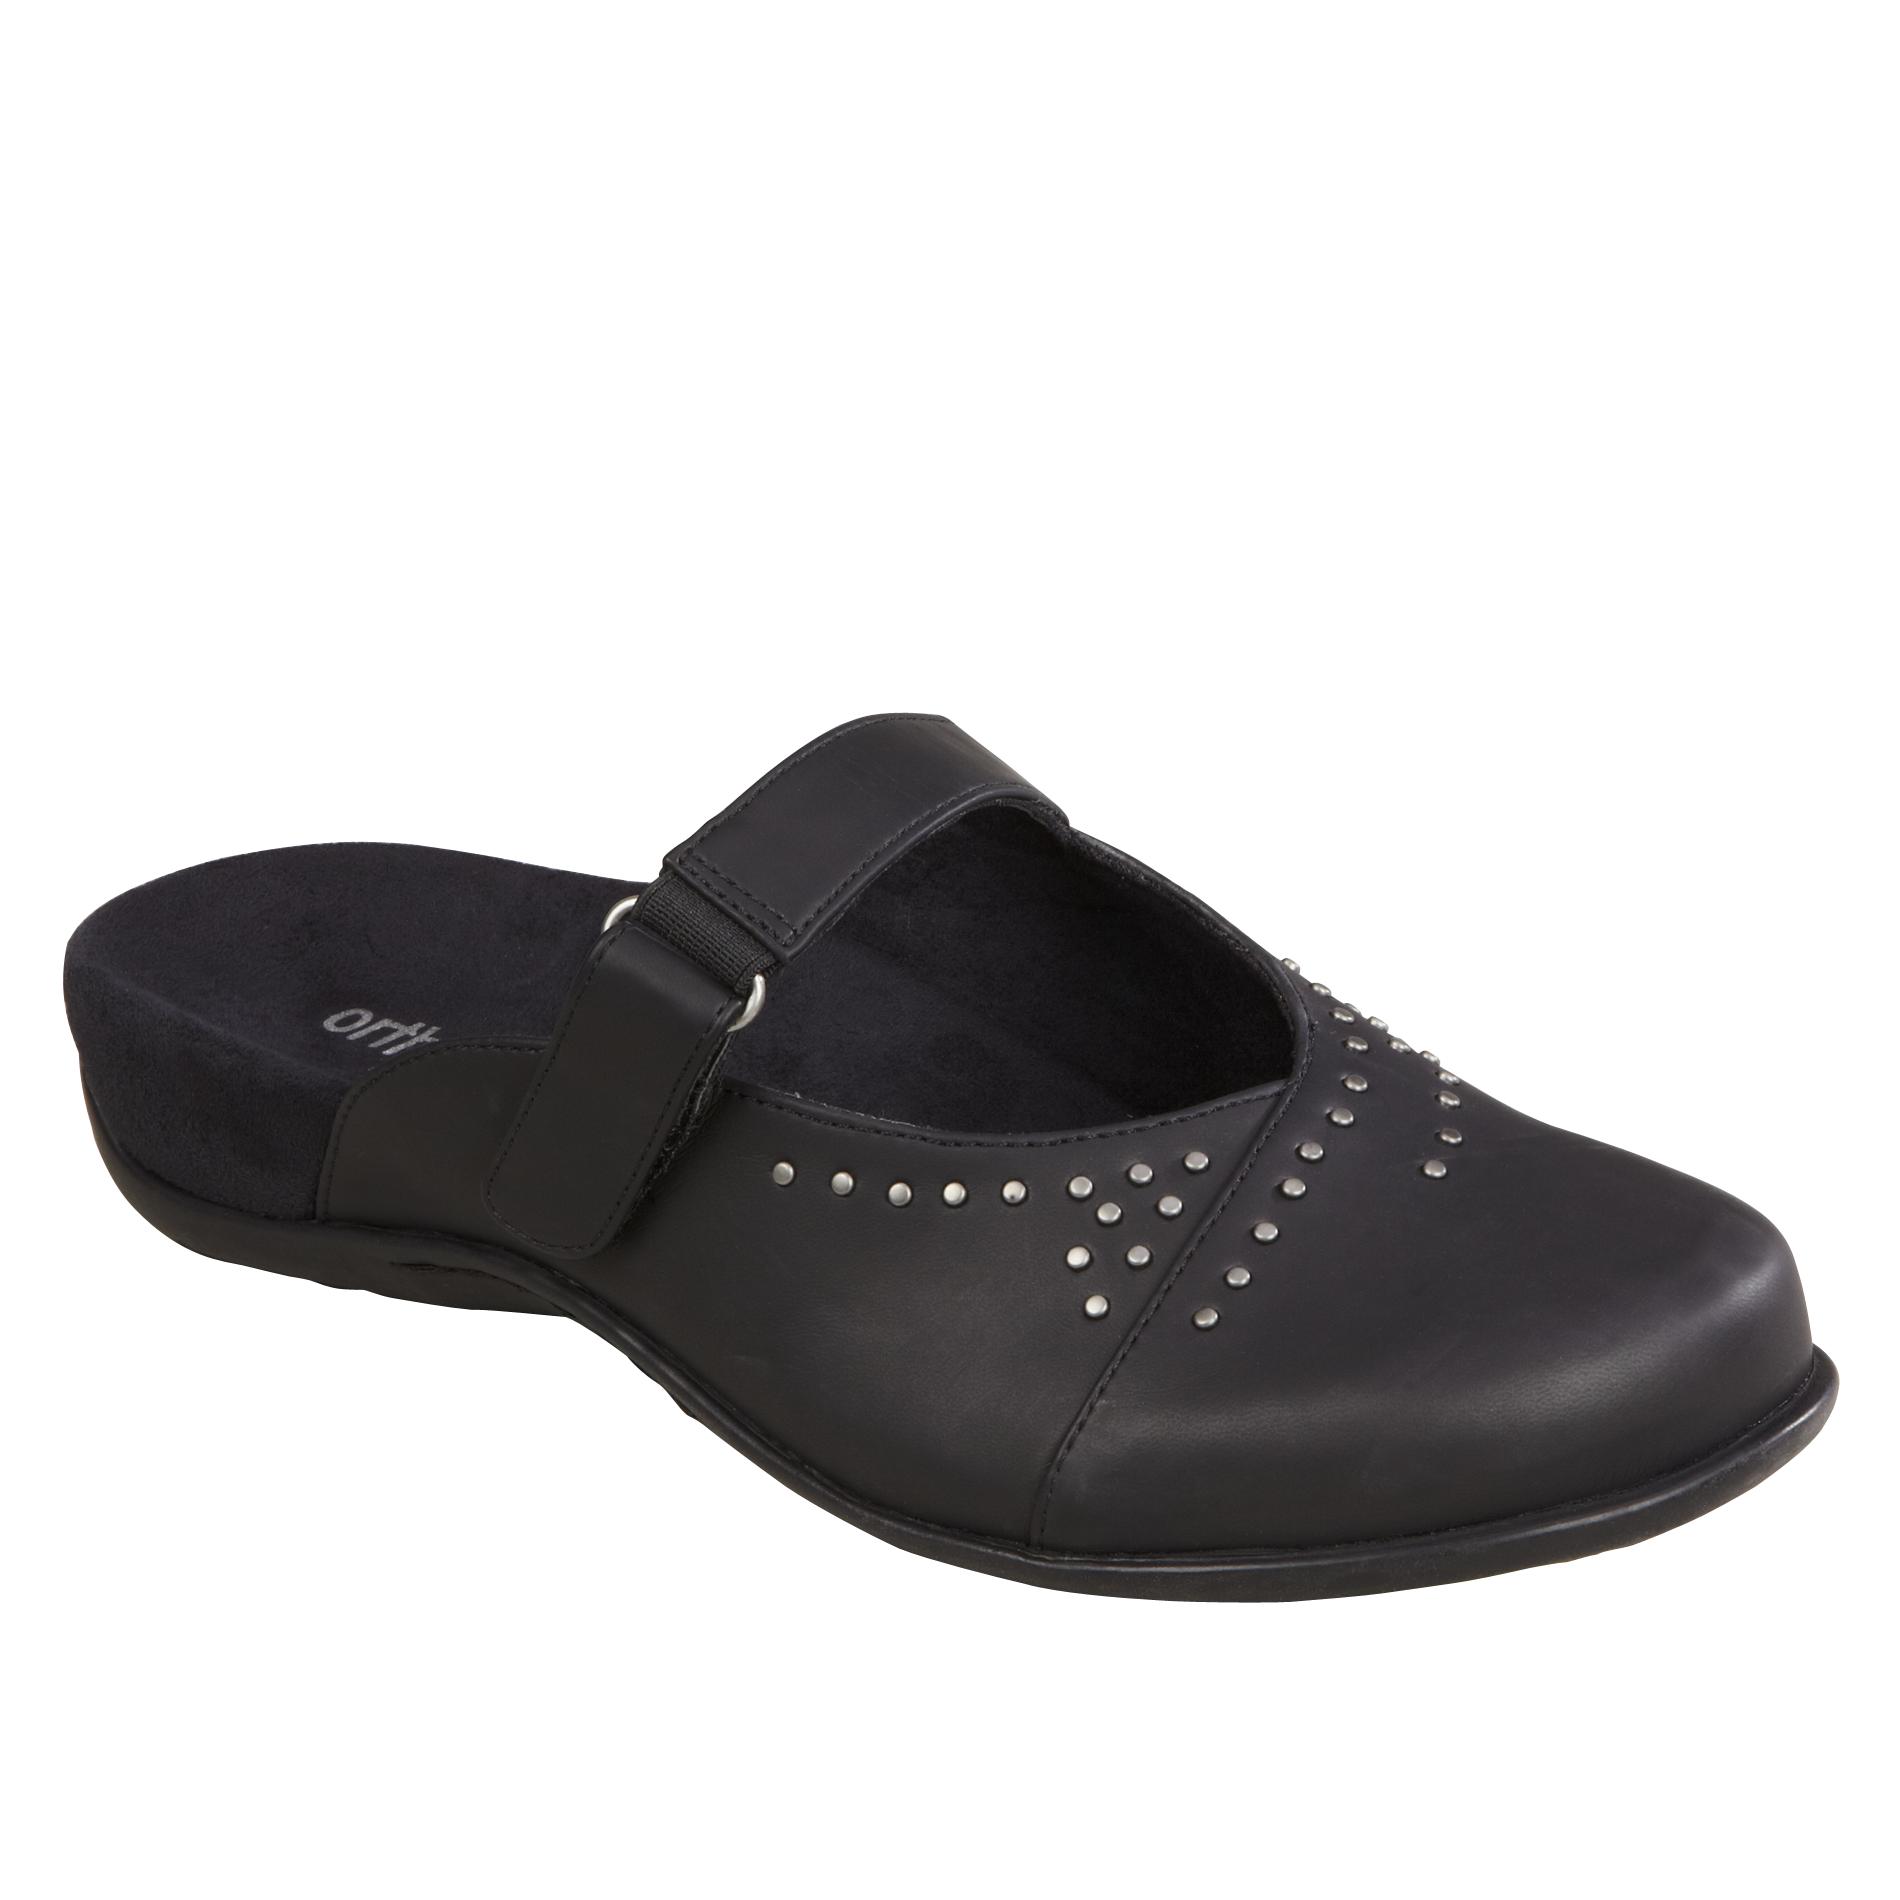 Vionic with Orthaheel Technology Women's Casual Shoe - AIRLIE - Black